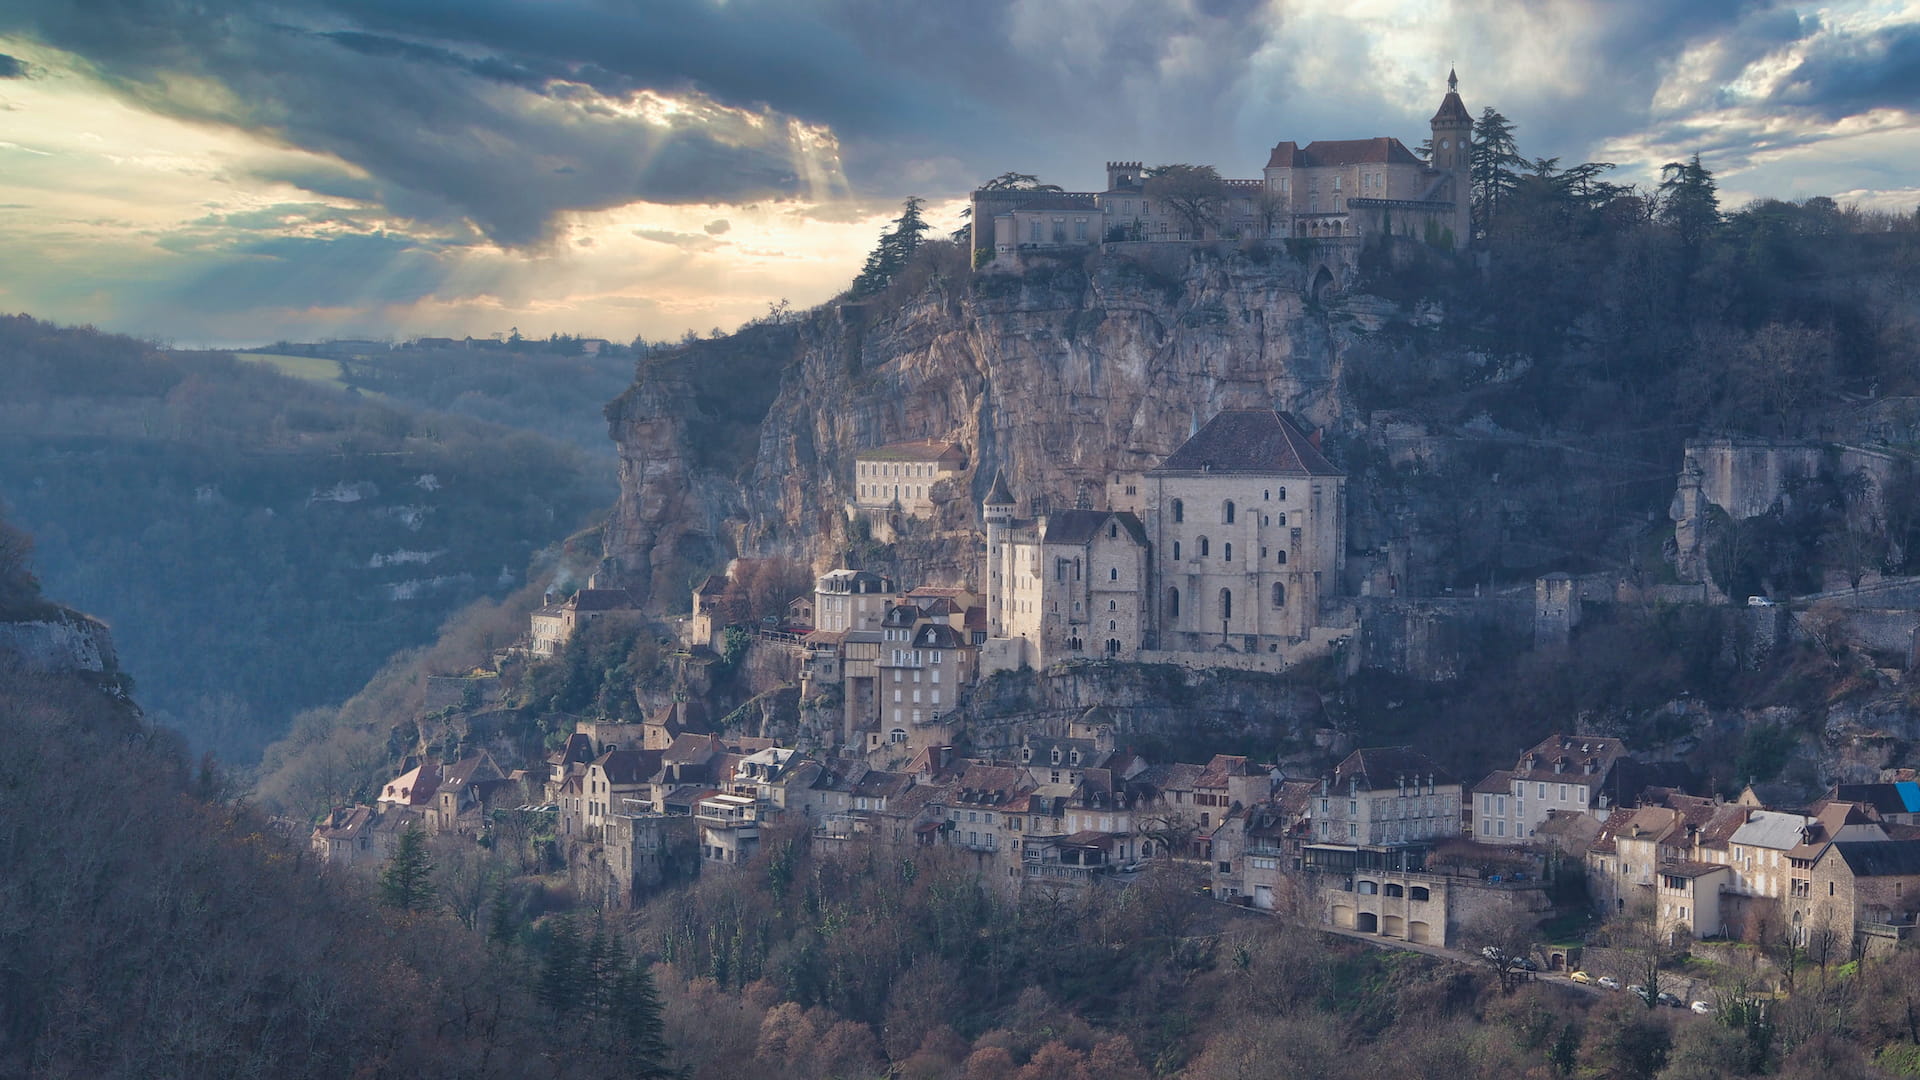 Stone houses cling to a hillside with a castle at the top, cloudy skies